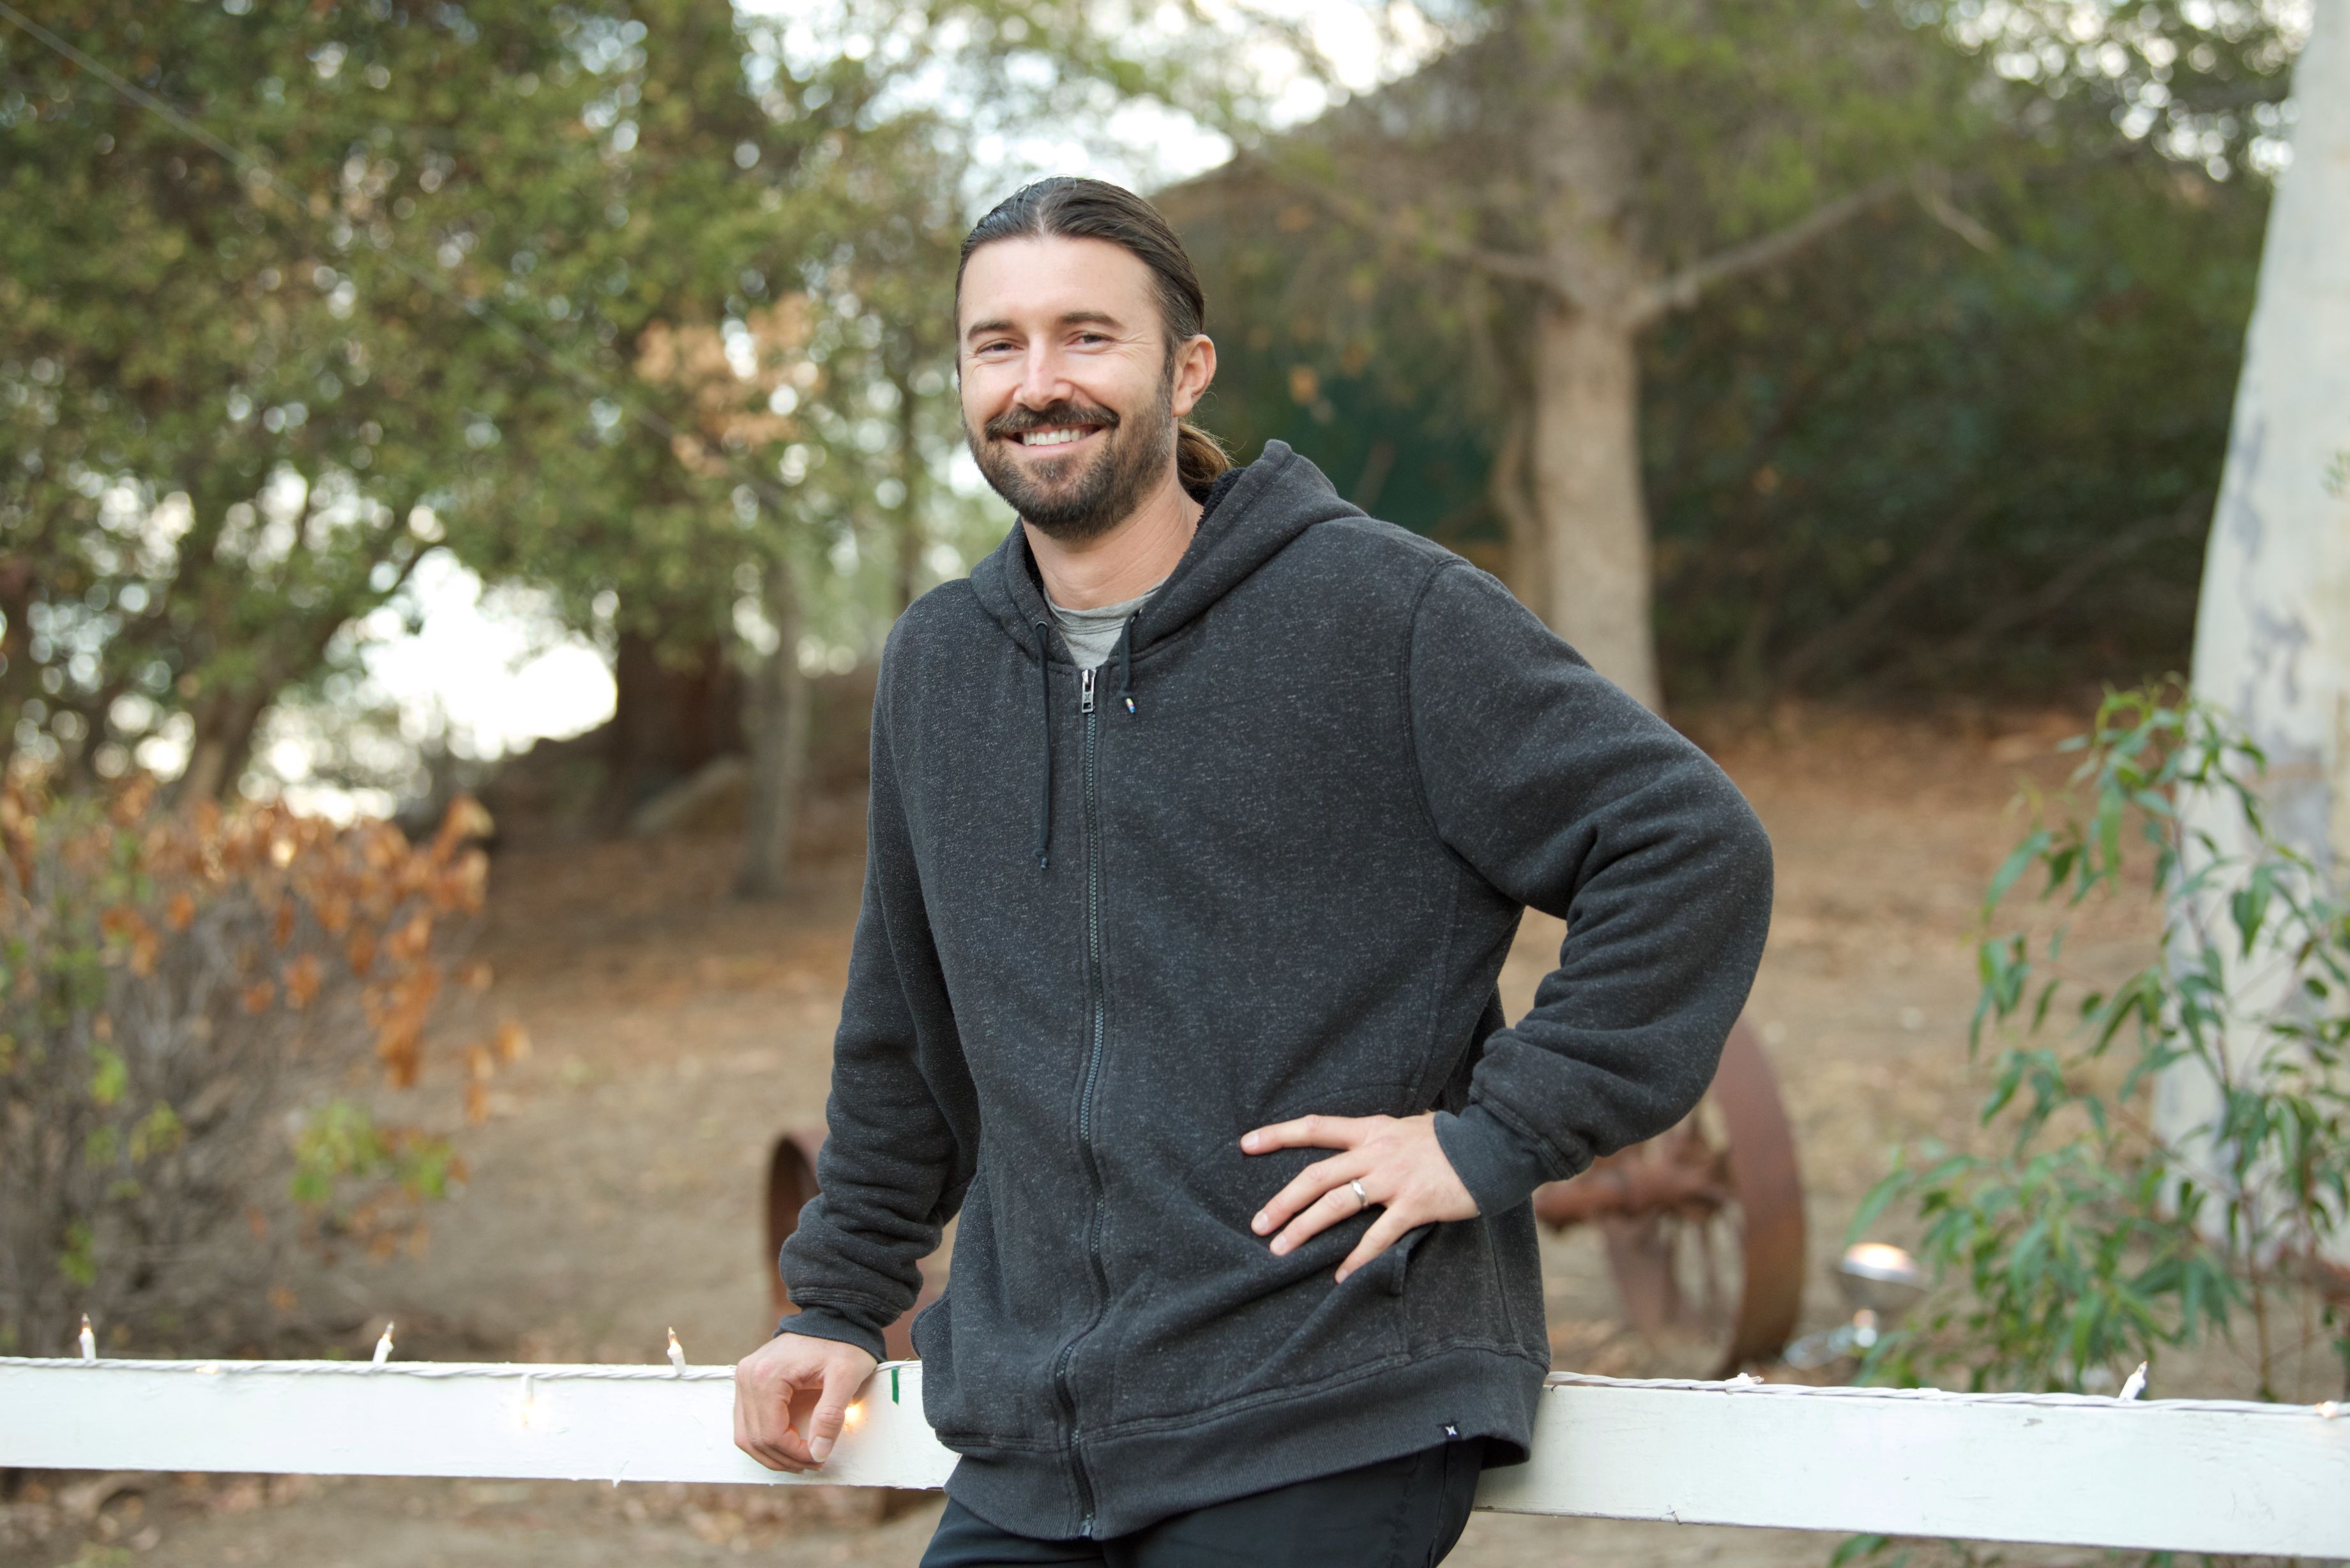 Brandon Jenner poses for a photo at his Record Release Party For "Burning Ground" in Malibu, California | Photo: Getty Images